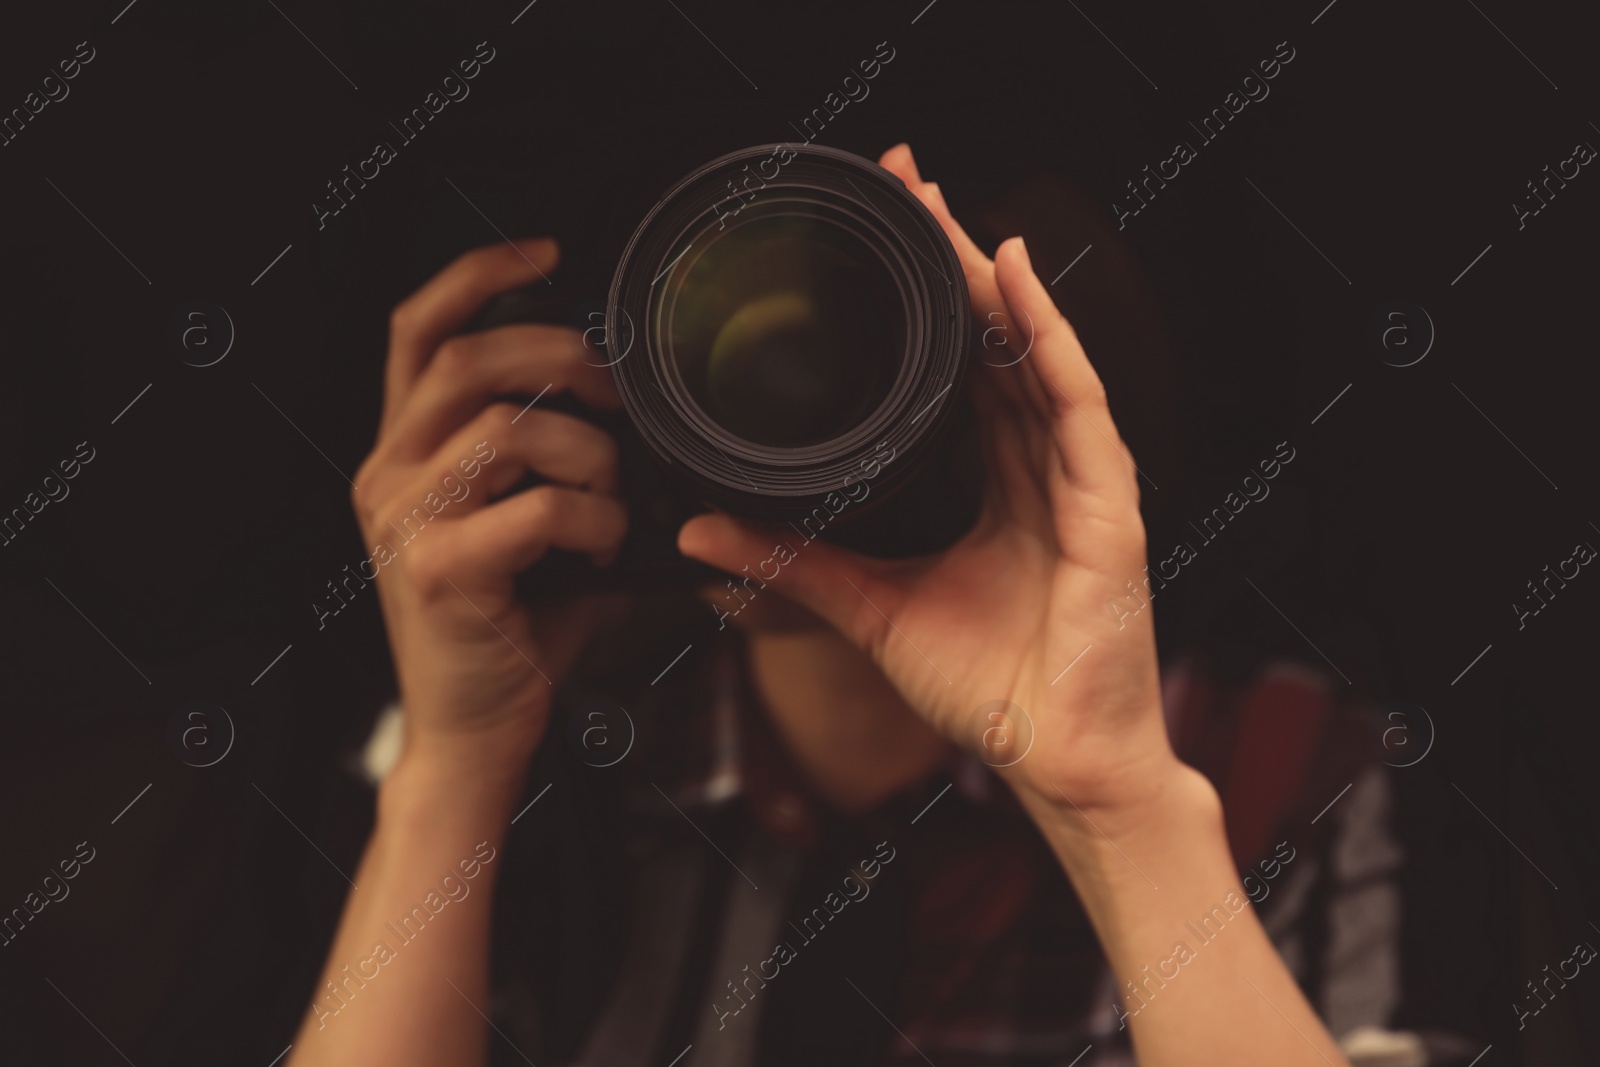 Photo of Private detective with camera spying against black background, focus on lens